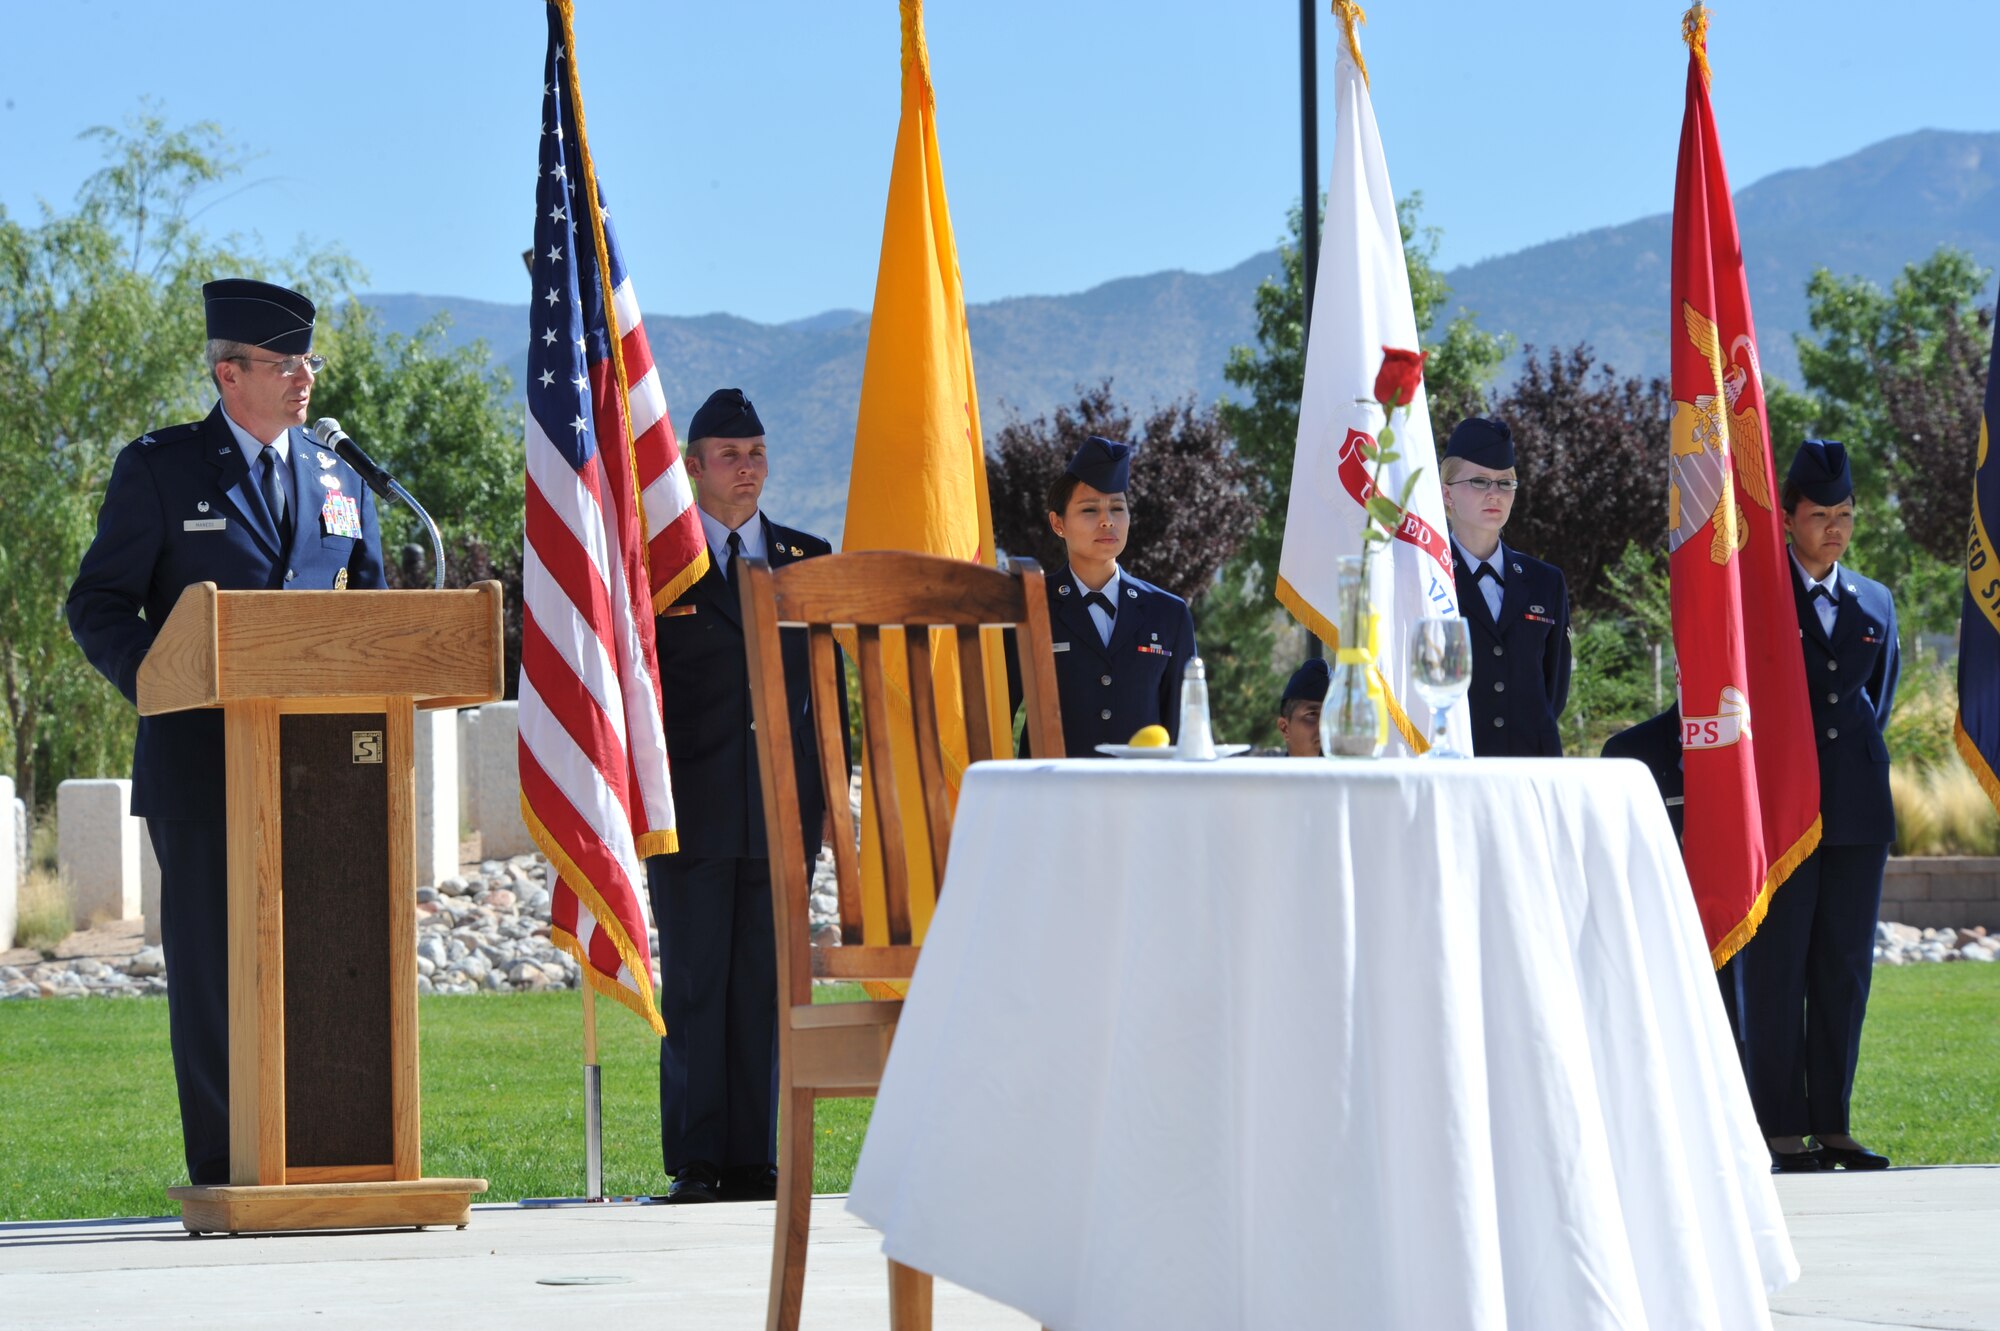 Col. Robert L. Maness, 377th Air Base Wing commander, addresses the audience during the POW/MIA Recognition Day ceremony Sept. 17 at the New Mexico Veterans Memorial.  U.S. Air Force Photo by Elizabeth Martinez